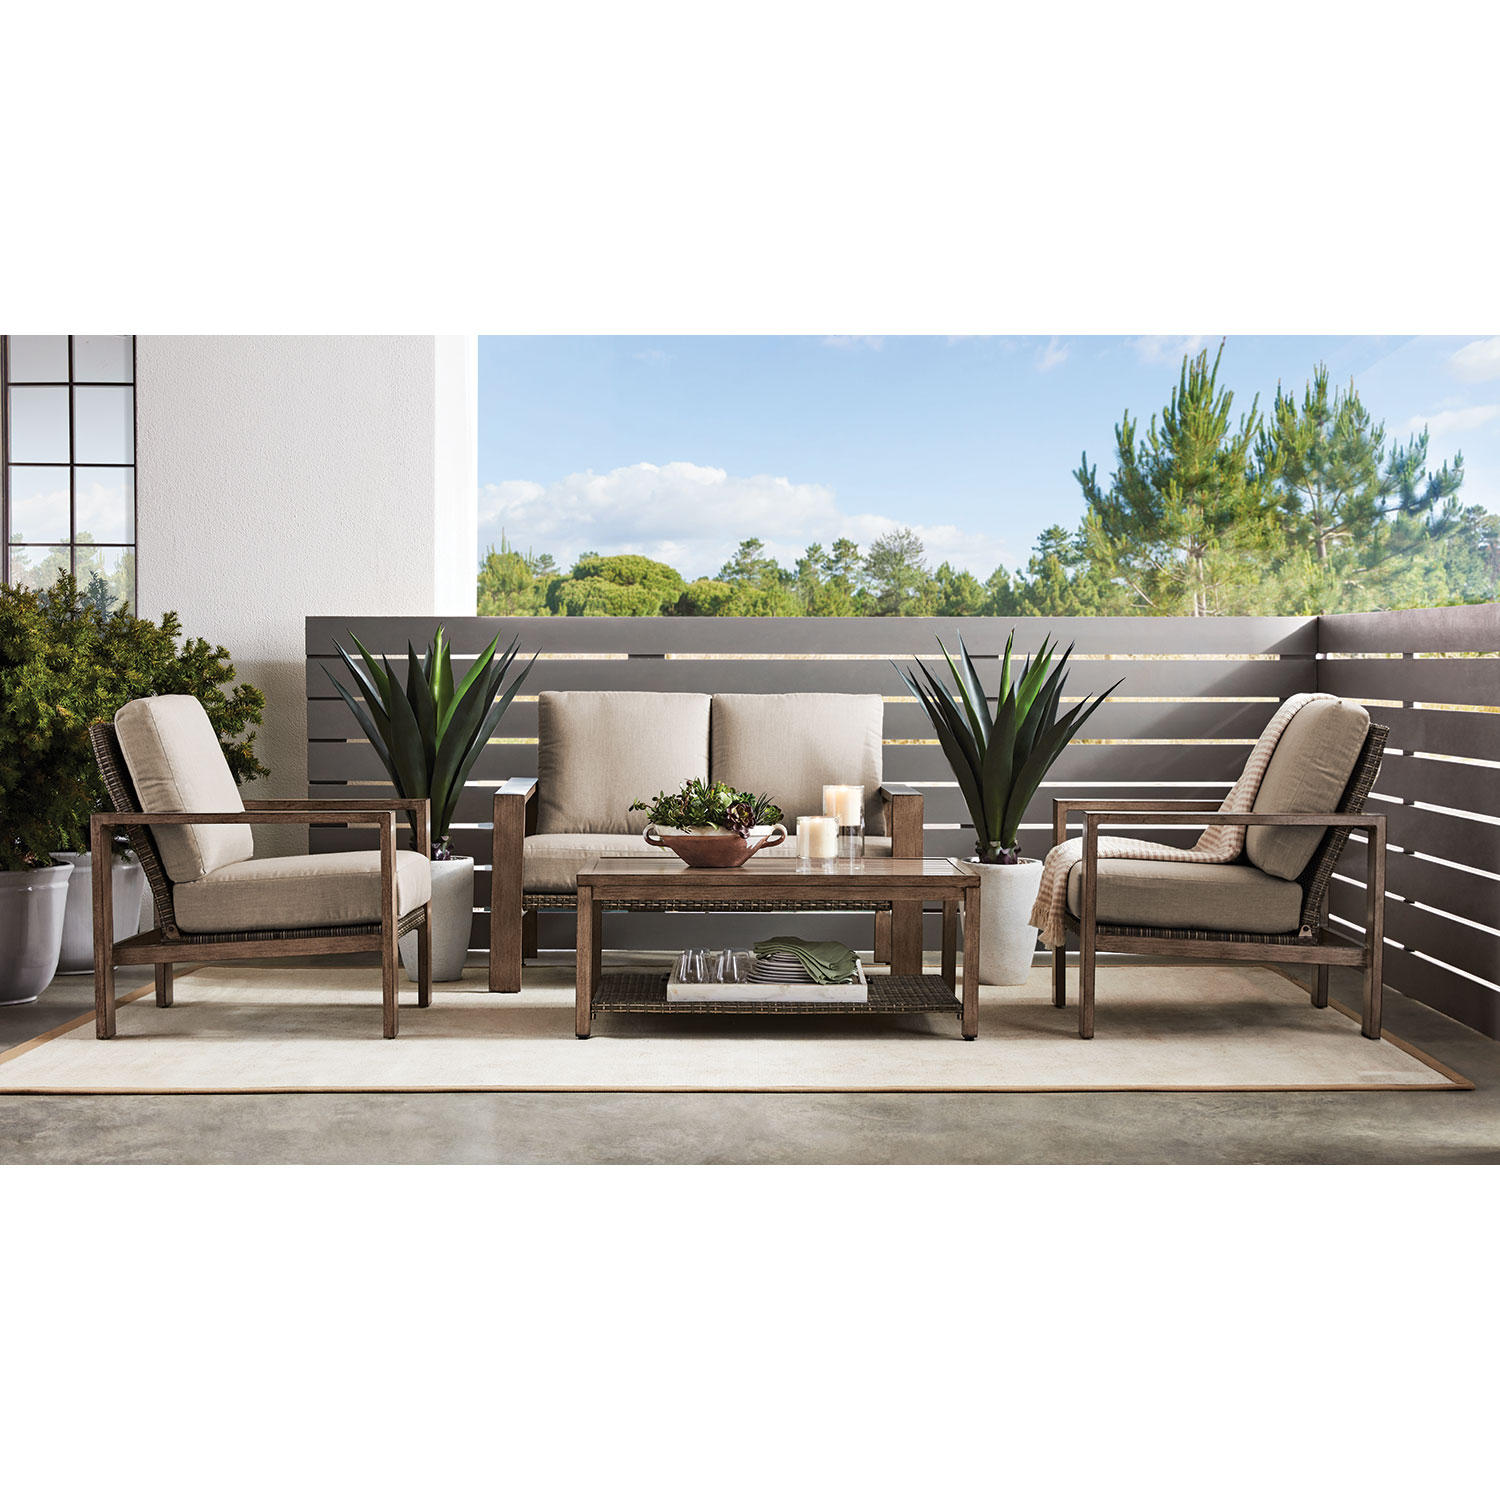 Member’s Mark Cahaba 4-Piece Small Space Seating Patio Set